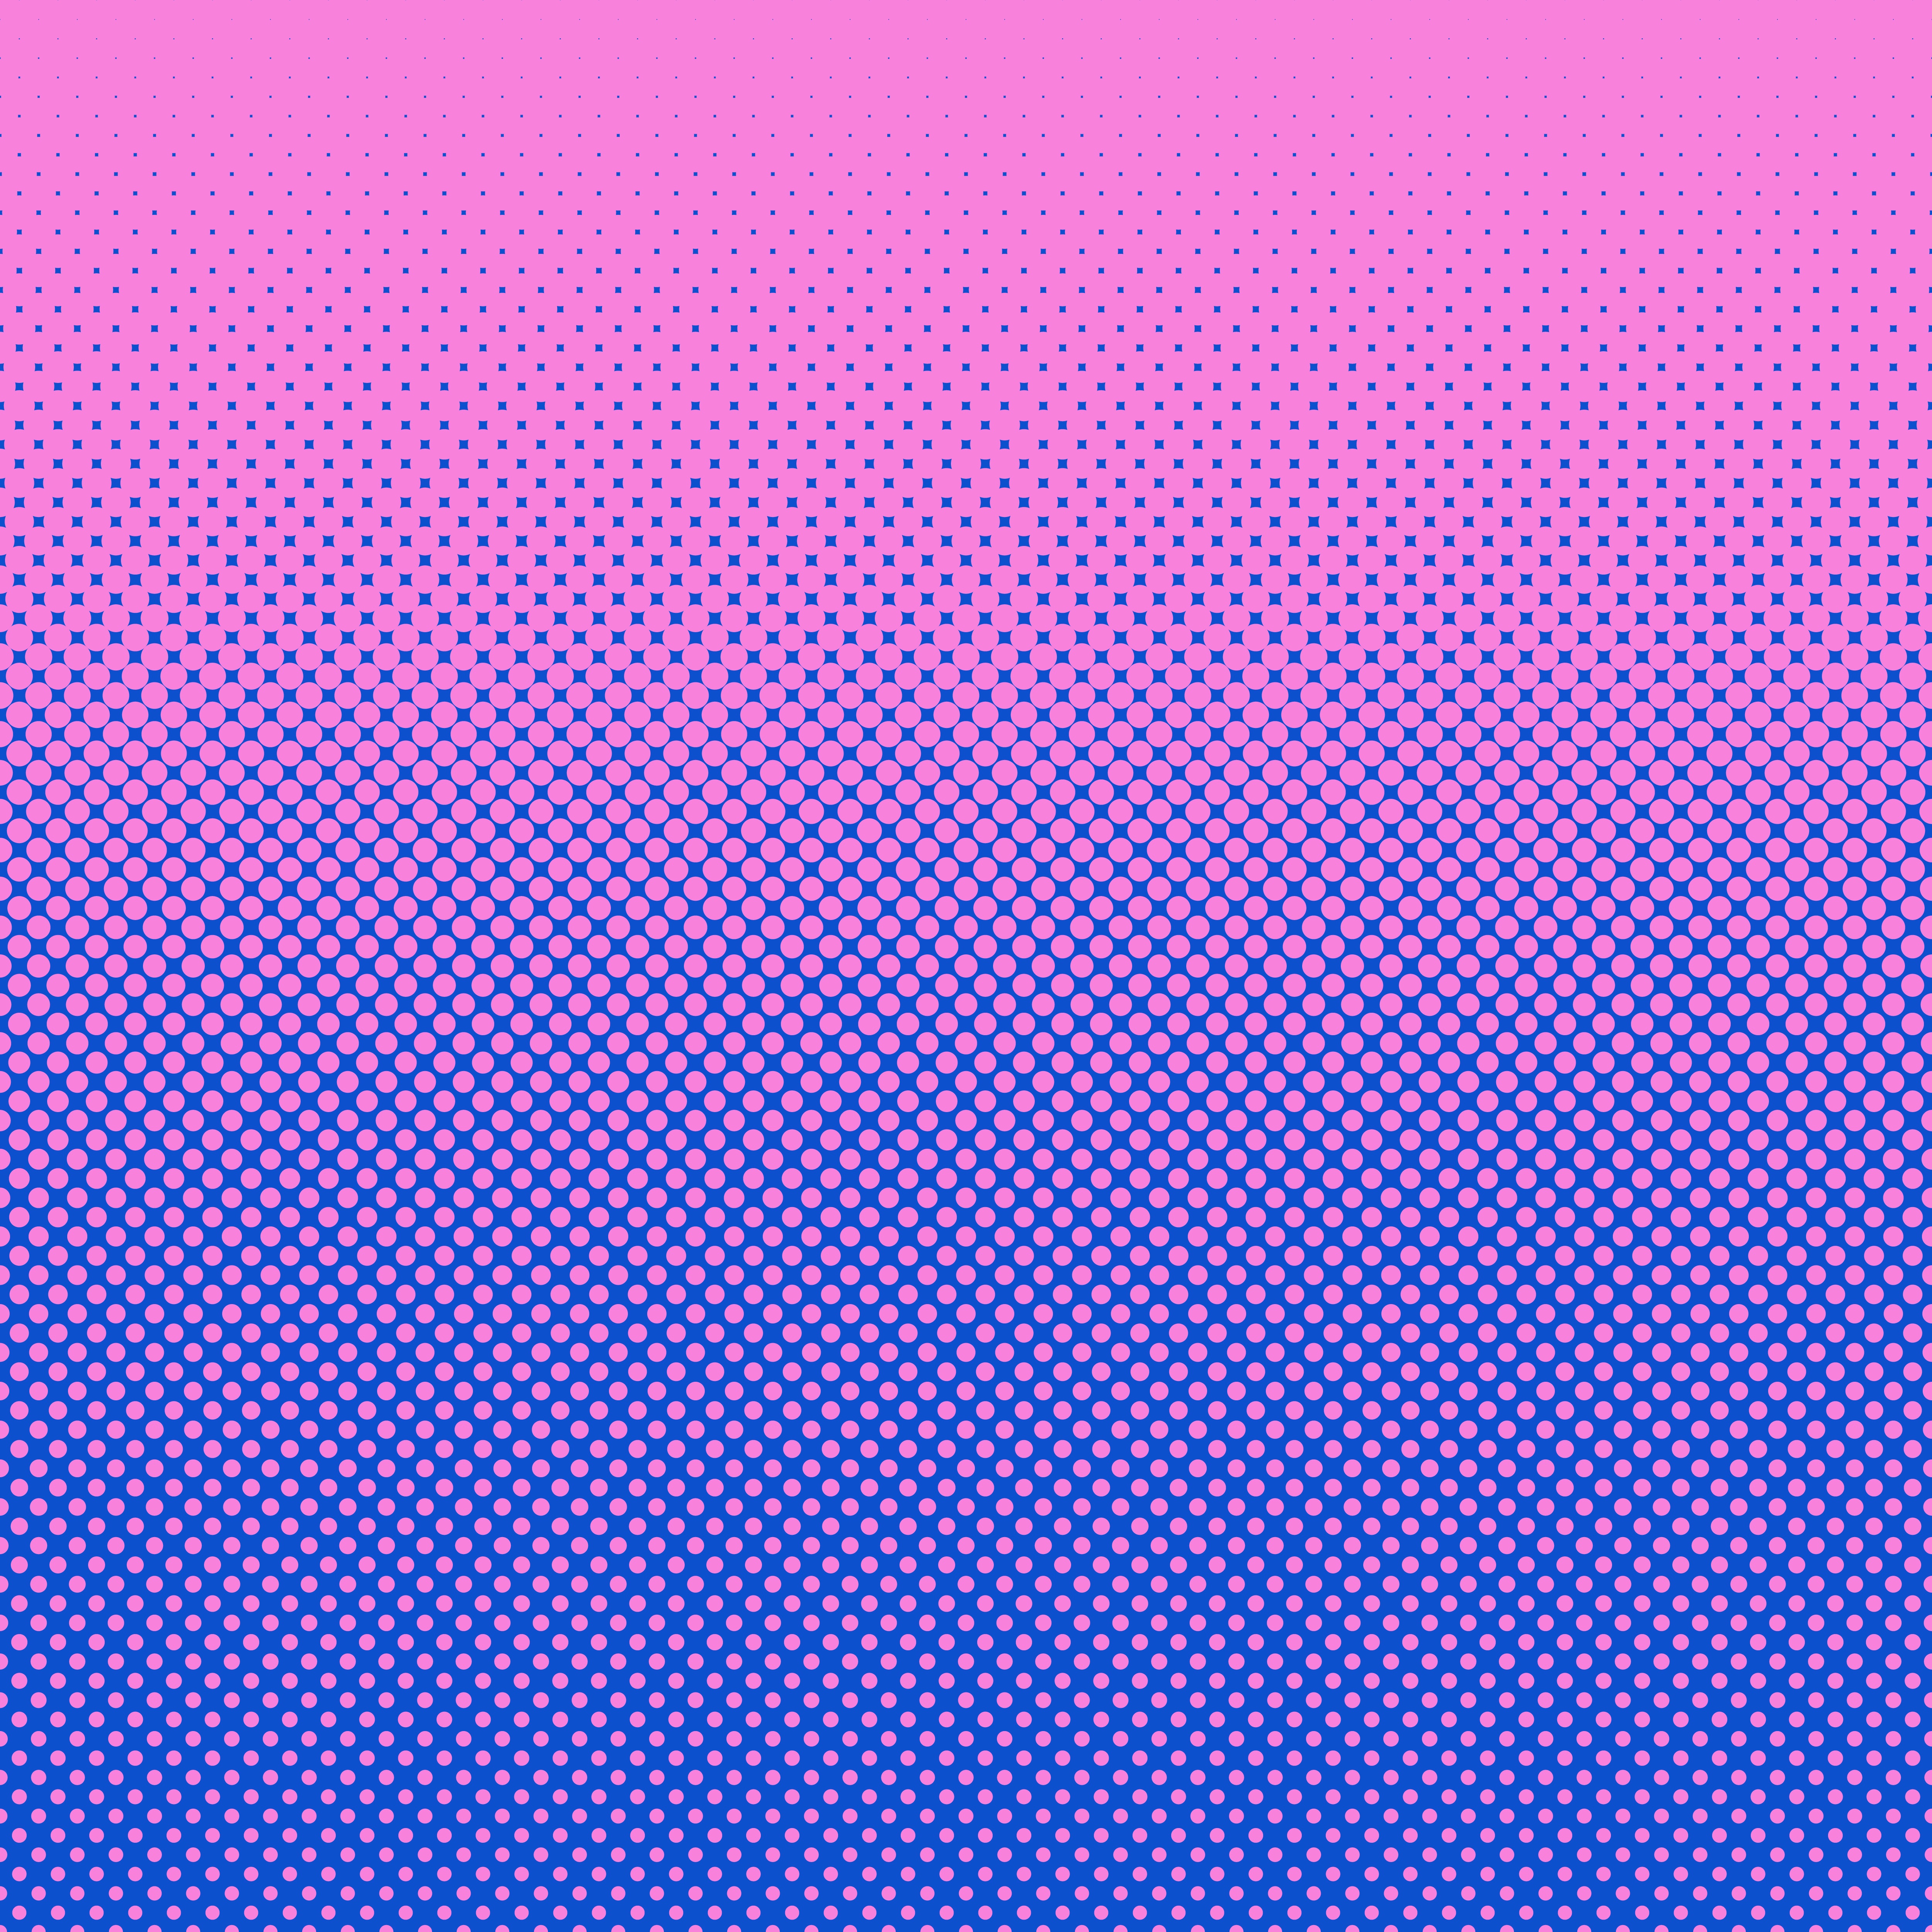 77133 download wallpaper circles, gradient, pink, texture, textures, points, point, pixels screensavers and pictures for free